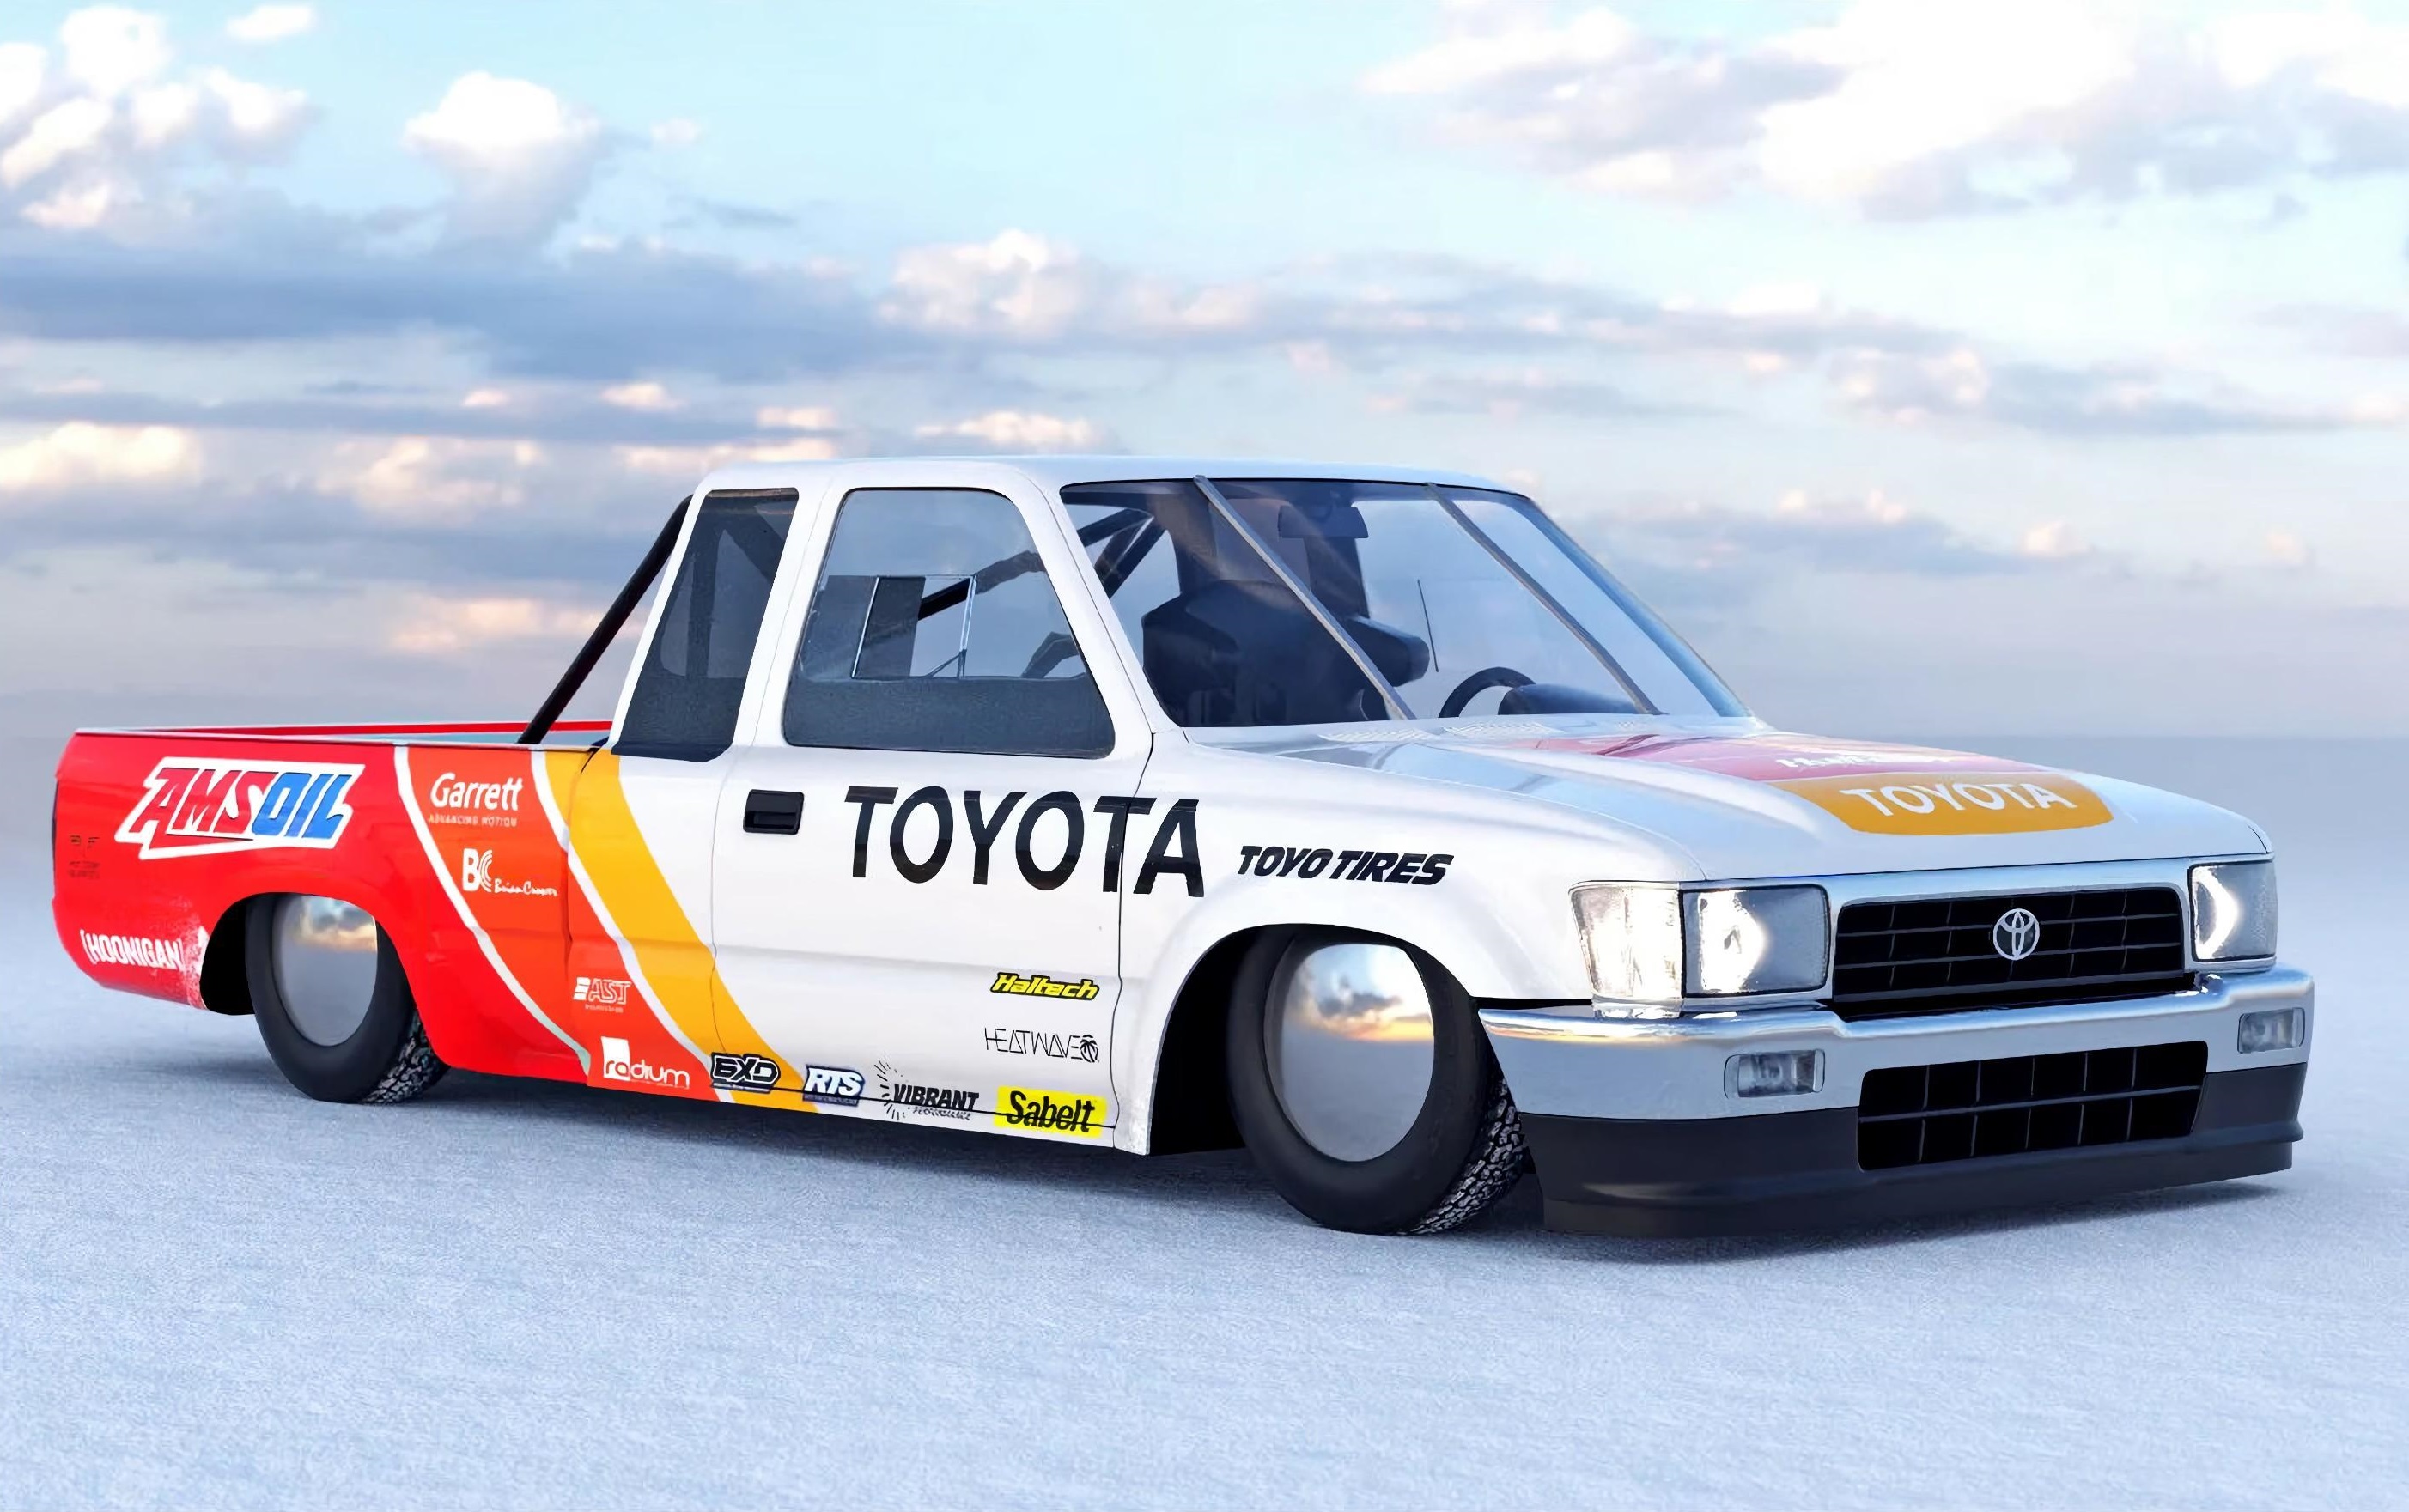 This Toyota Hilux Might Soon Be The Fastest Toyota Truck Ever Made!